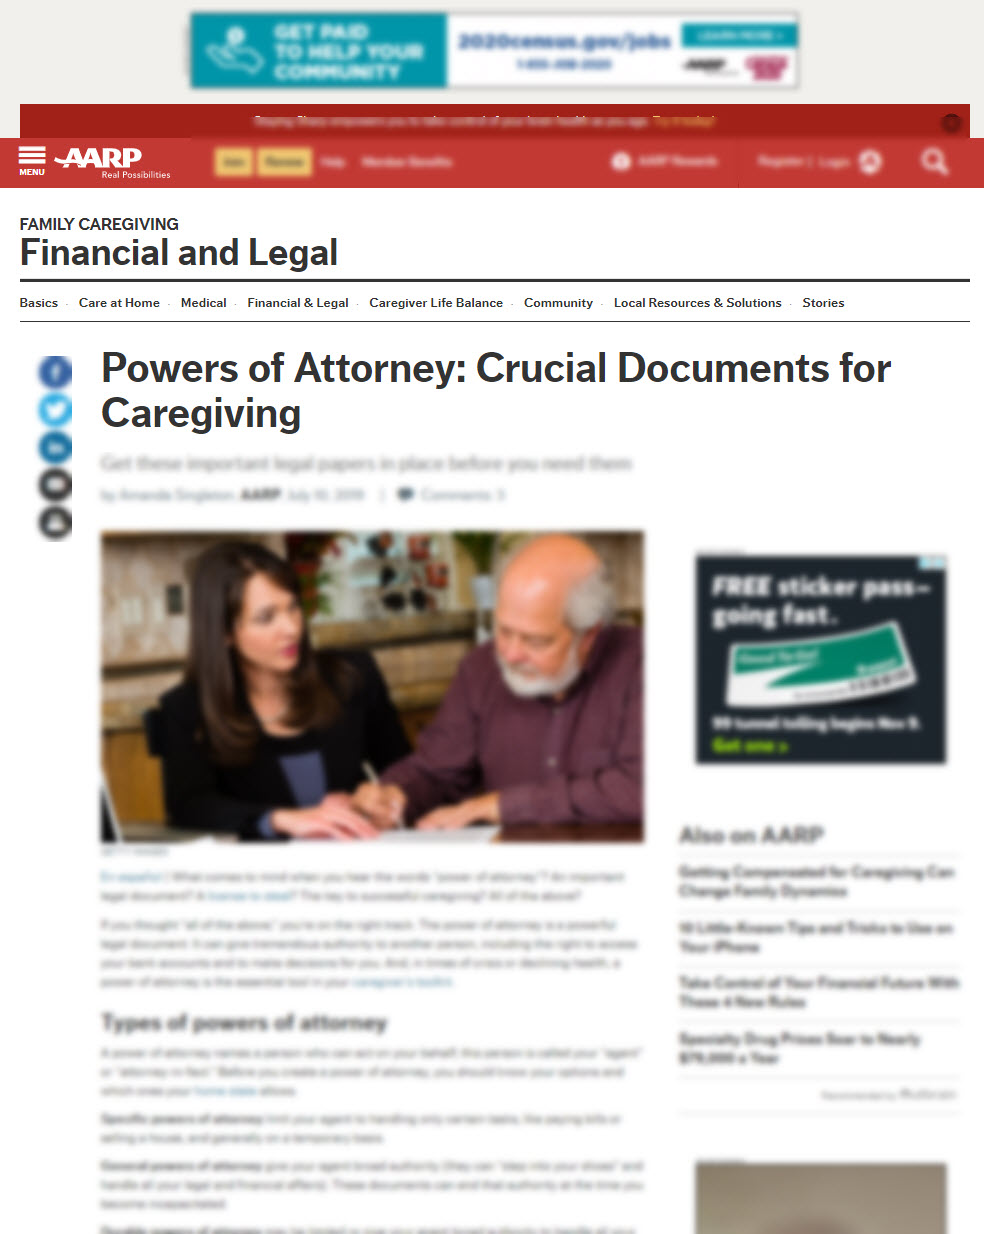 Powers of Attorney: Crucial Documents for Caregiving